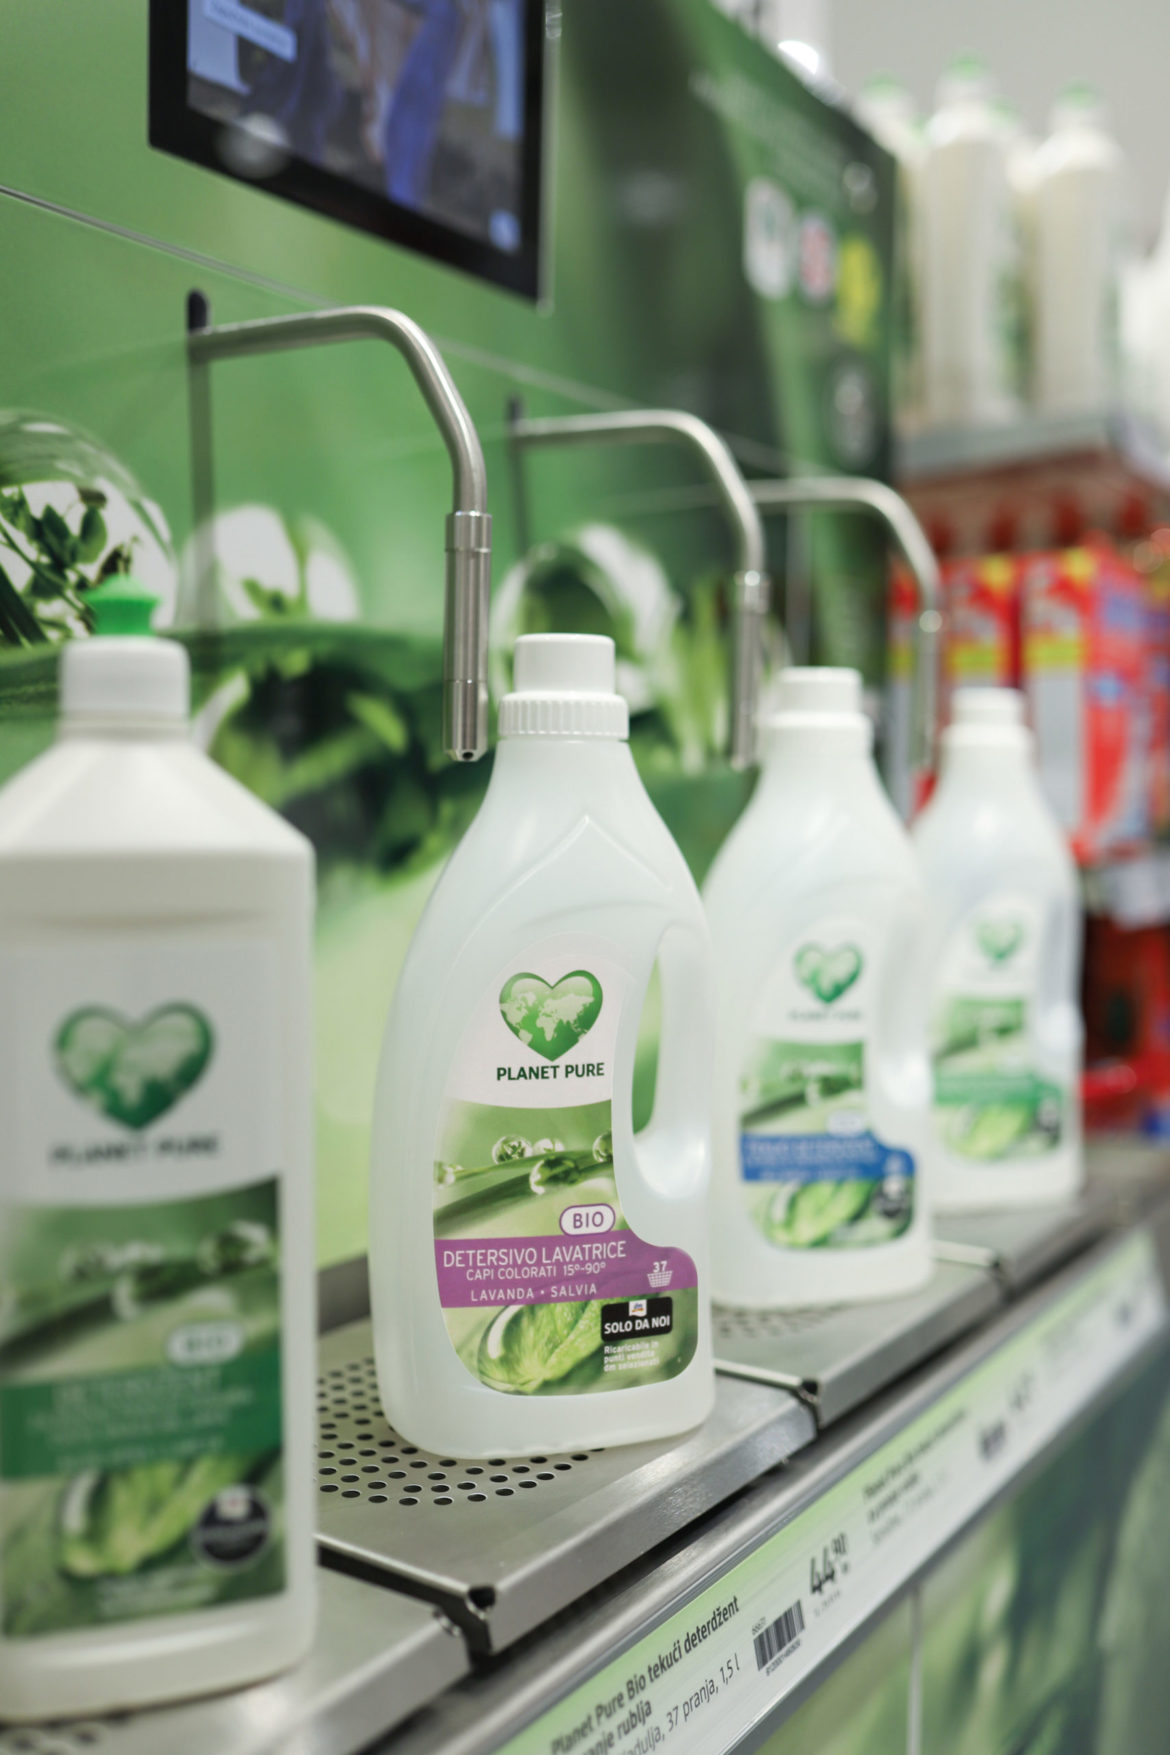 UNPURPOSED IS BETTER: dm offers new bio-detergents on tap in three stores